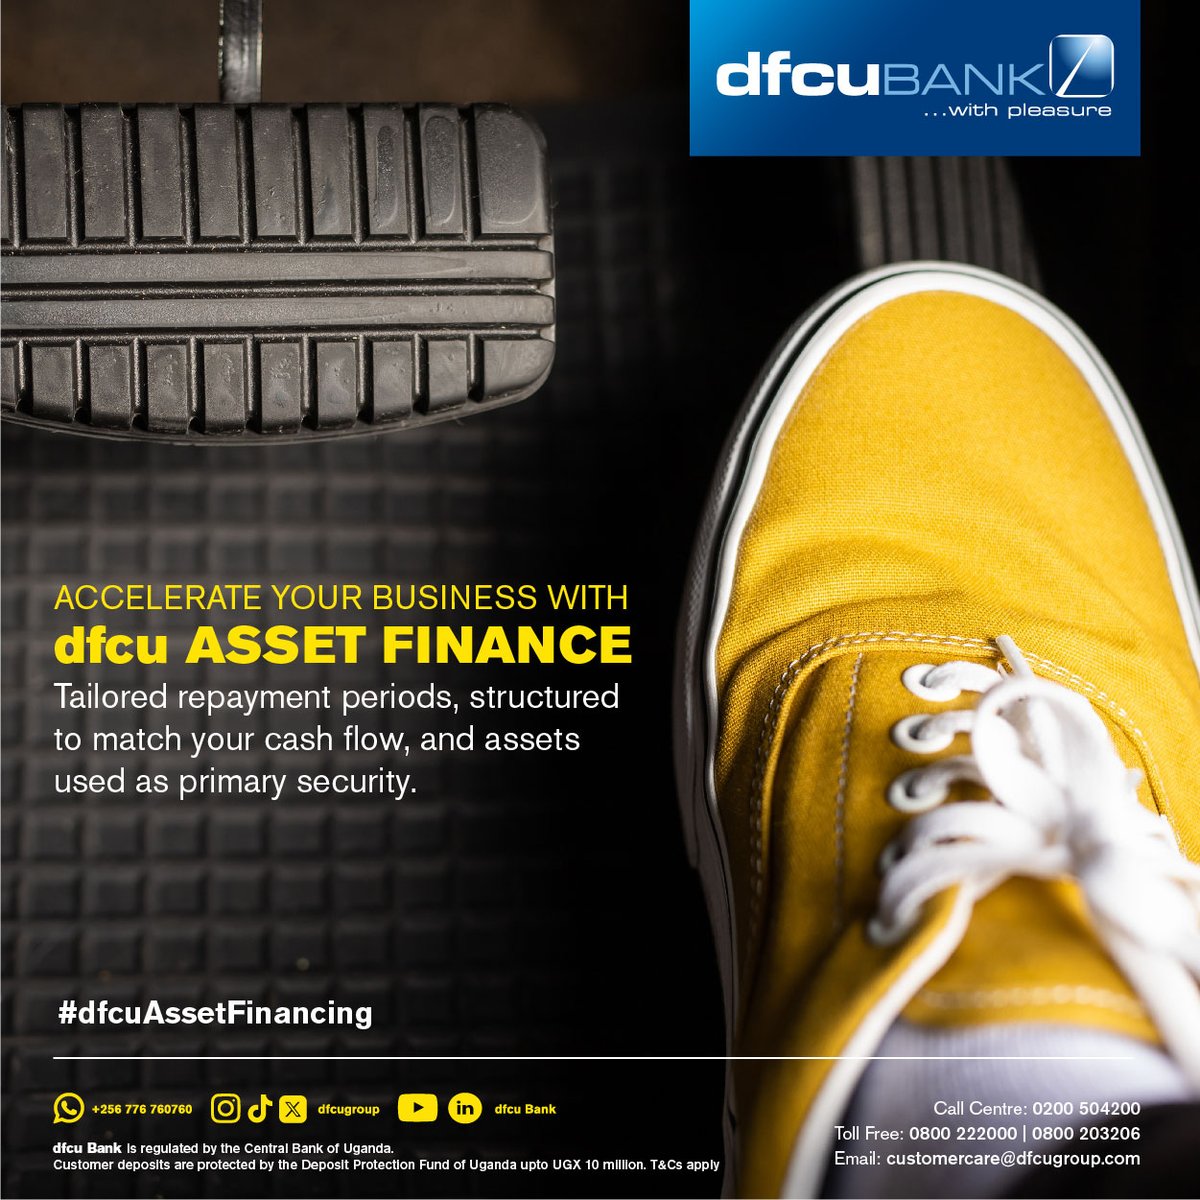 #AD📢
Unlock your business potentials with #dfcuAssetFinance and go next level〽️

This product from @dfcugroup helps you access funds using your assets as security.

For more Call 0800 222000 to get assistance.
#TransformingLivesAndBusinesses